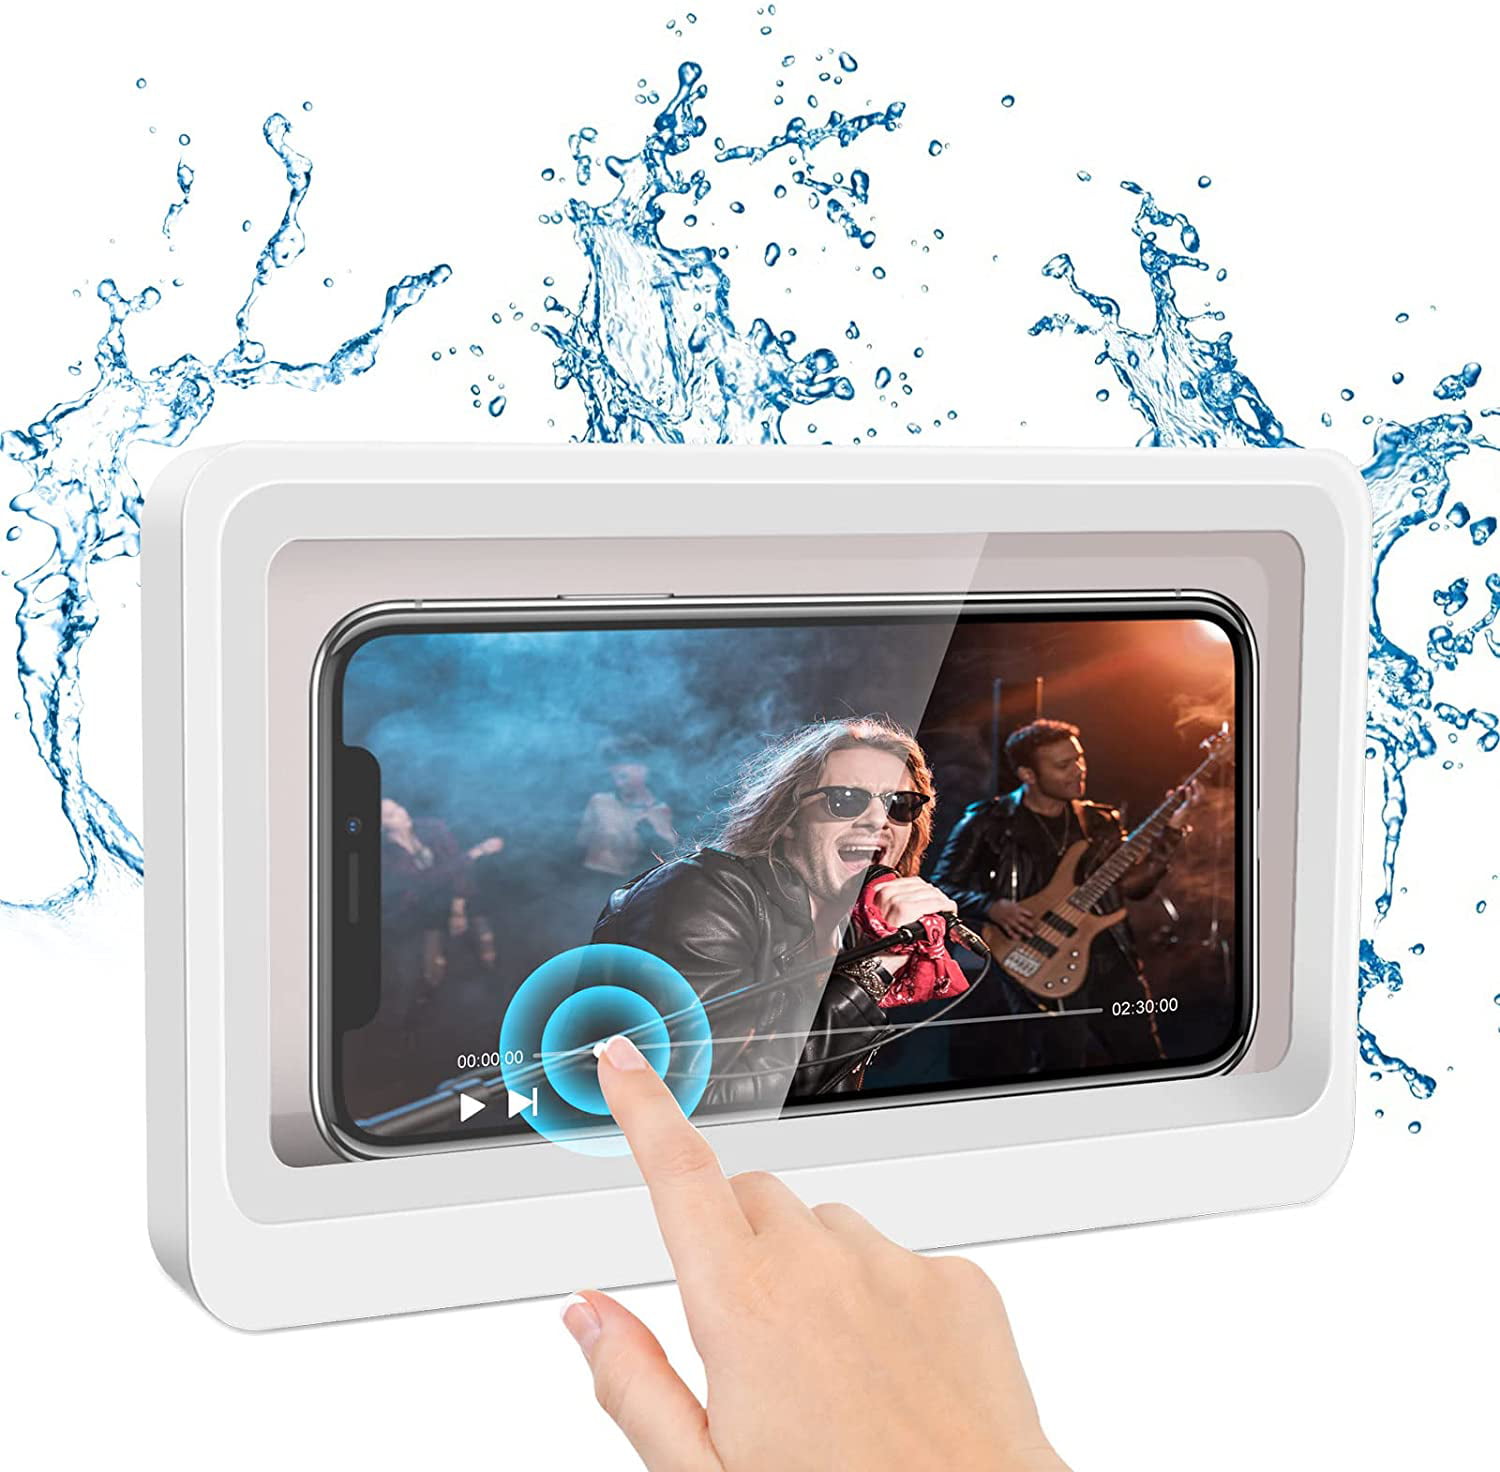 Shower Case Mobile Phone Bracket Shower Phone Holder Waterproof Transparent Screen Wall Hanging 360° Rotation Anti Fog Bathroom Box for Phone Touch Screen with 2 Hooks 